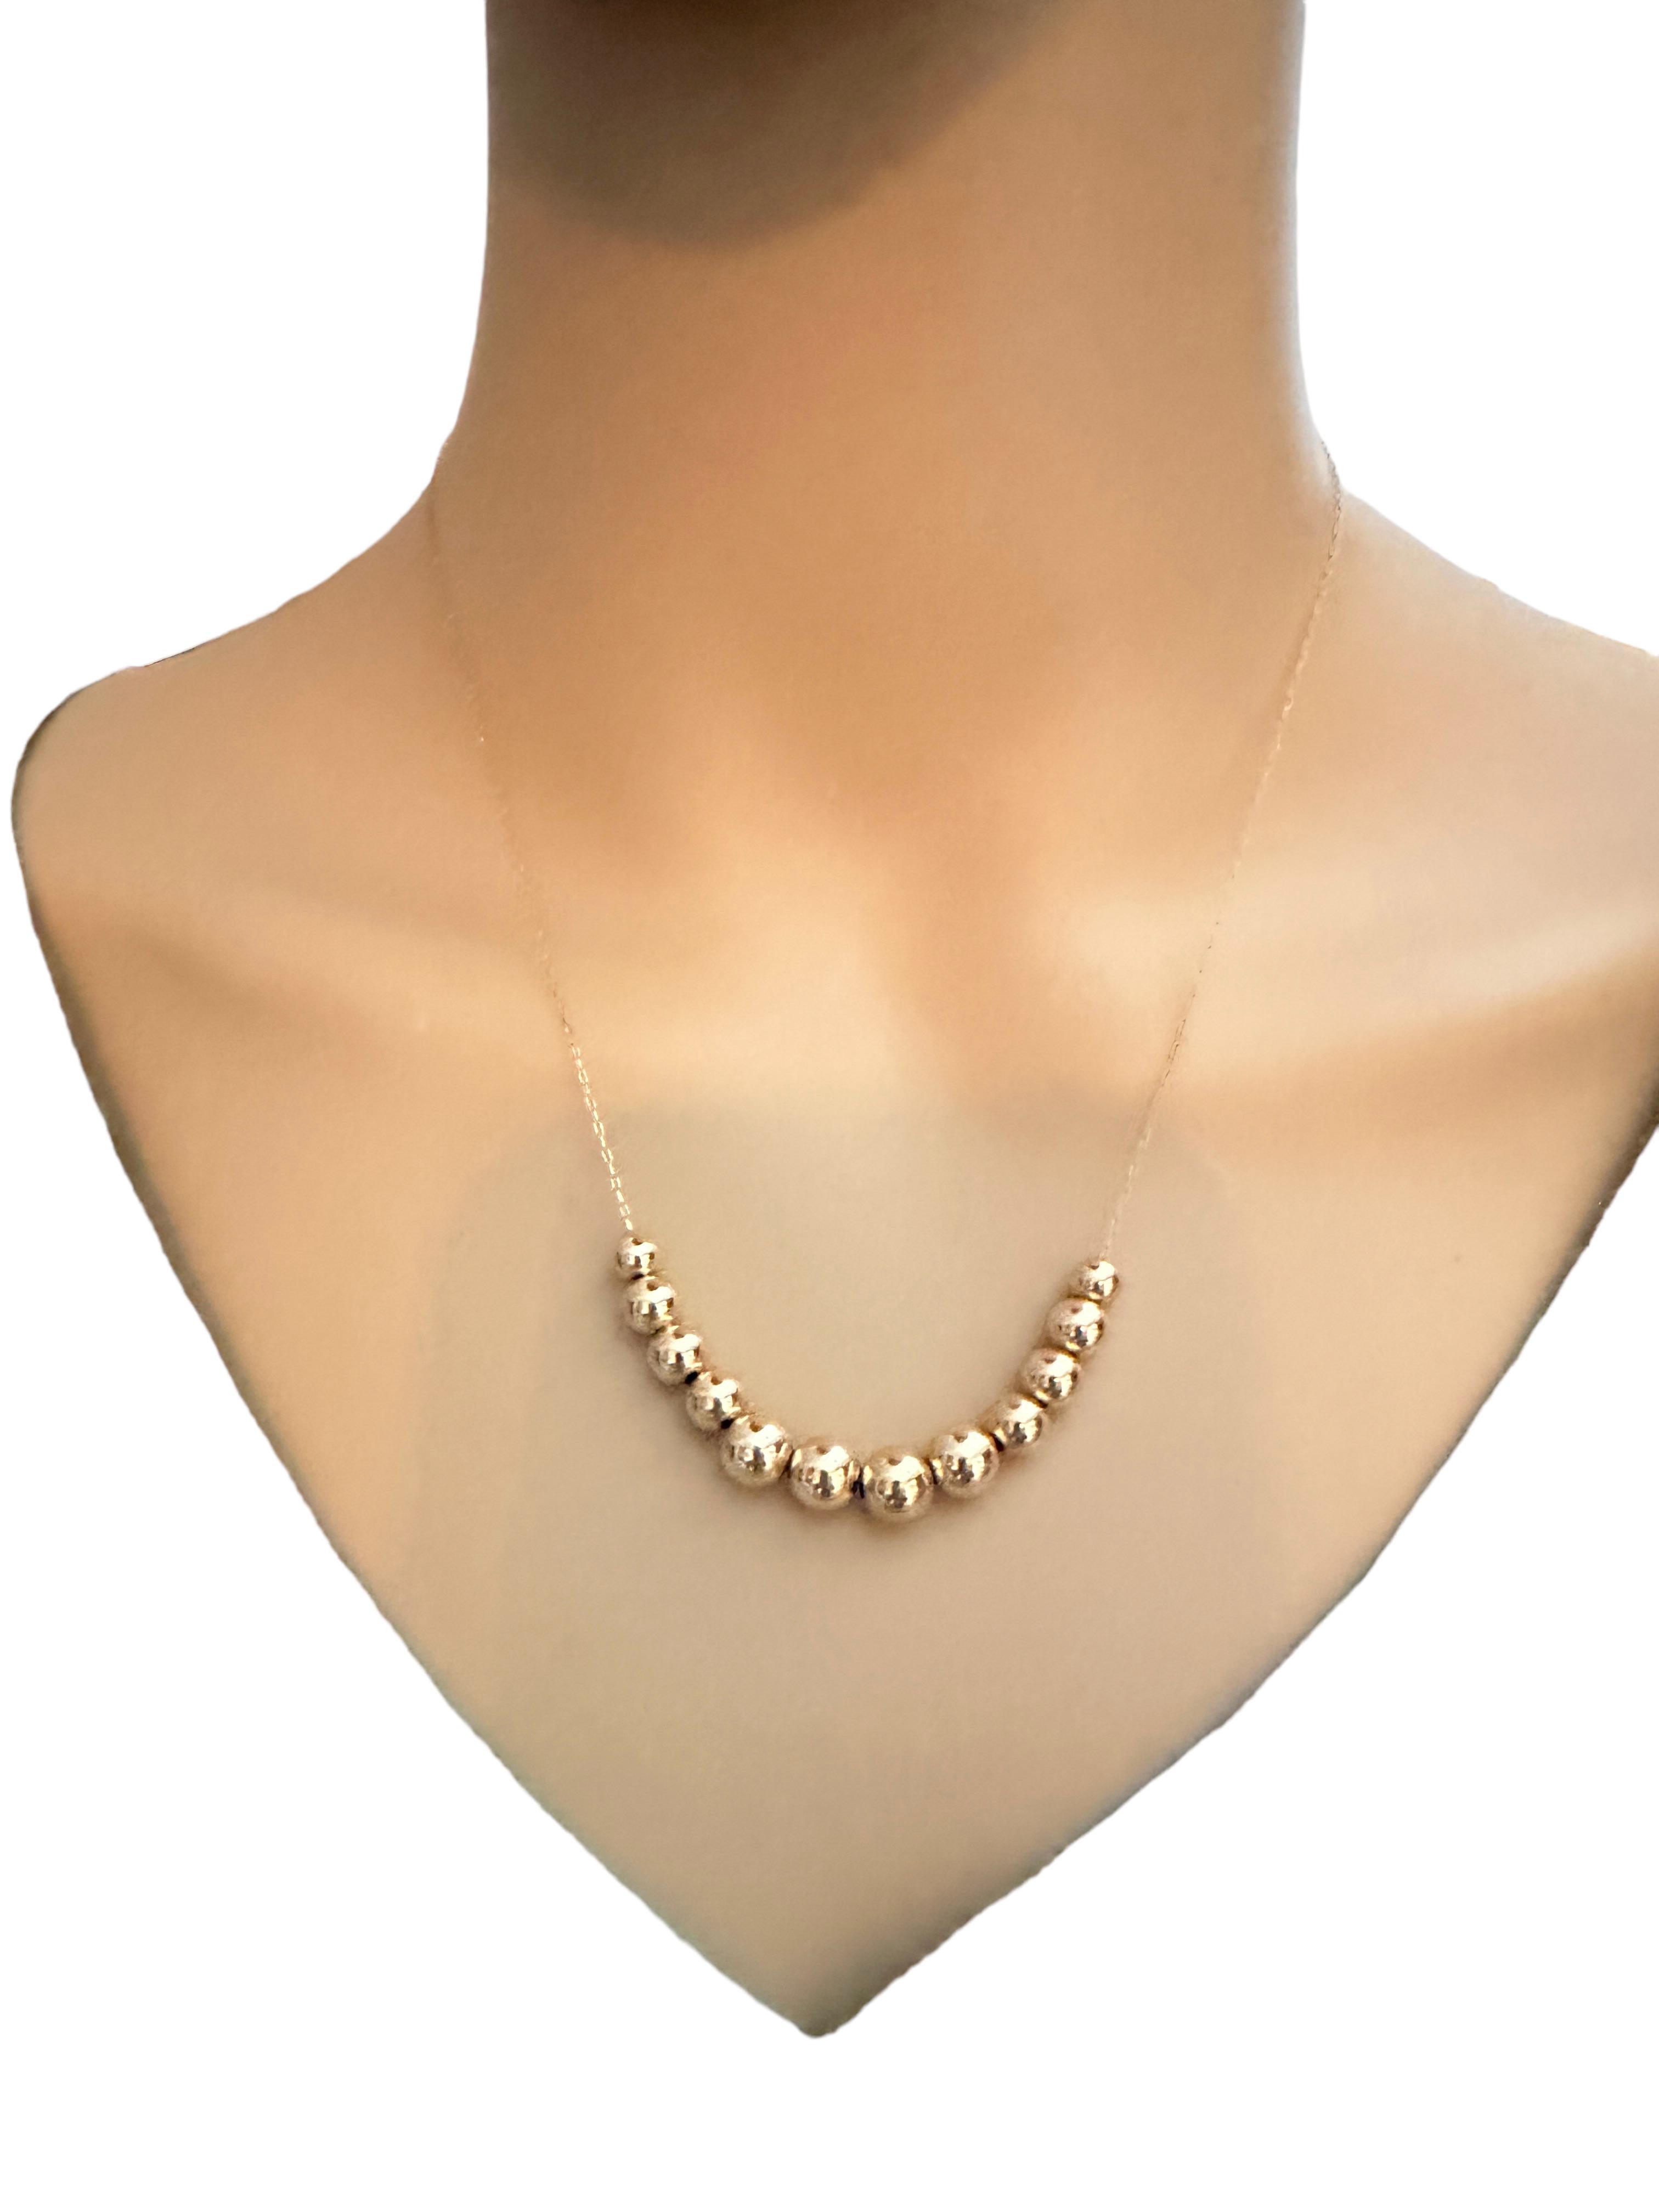 This is a gorgeous and delicate necklace!  It is pre-owned but in fabulous condition.  The chain is 14k Yellow Gold and is 18 inches long.  It has 12 14k Gold beads, the largest is 7mm and graduates down to the smallest which is 5 mm.  It has a